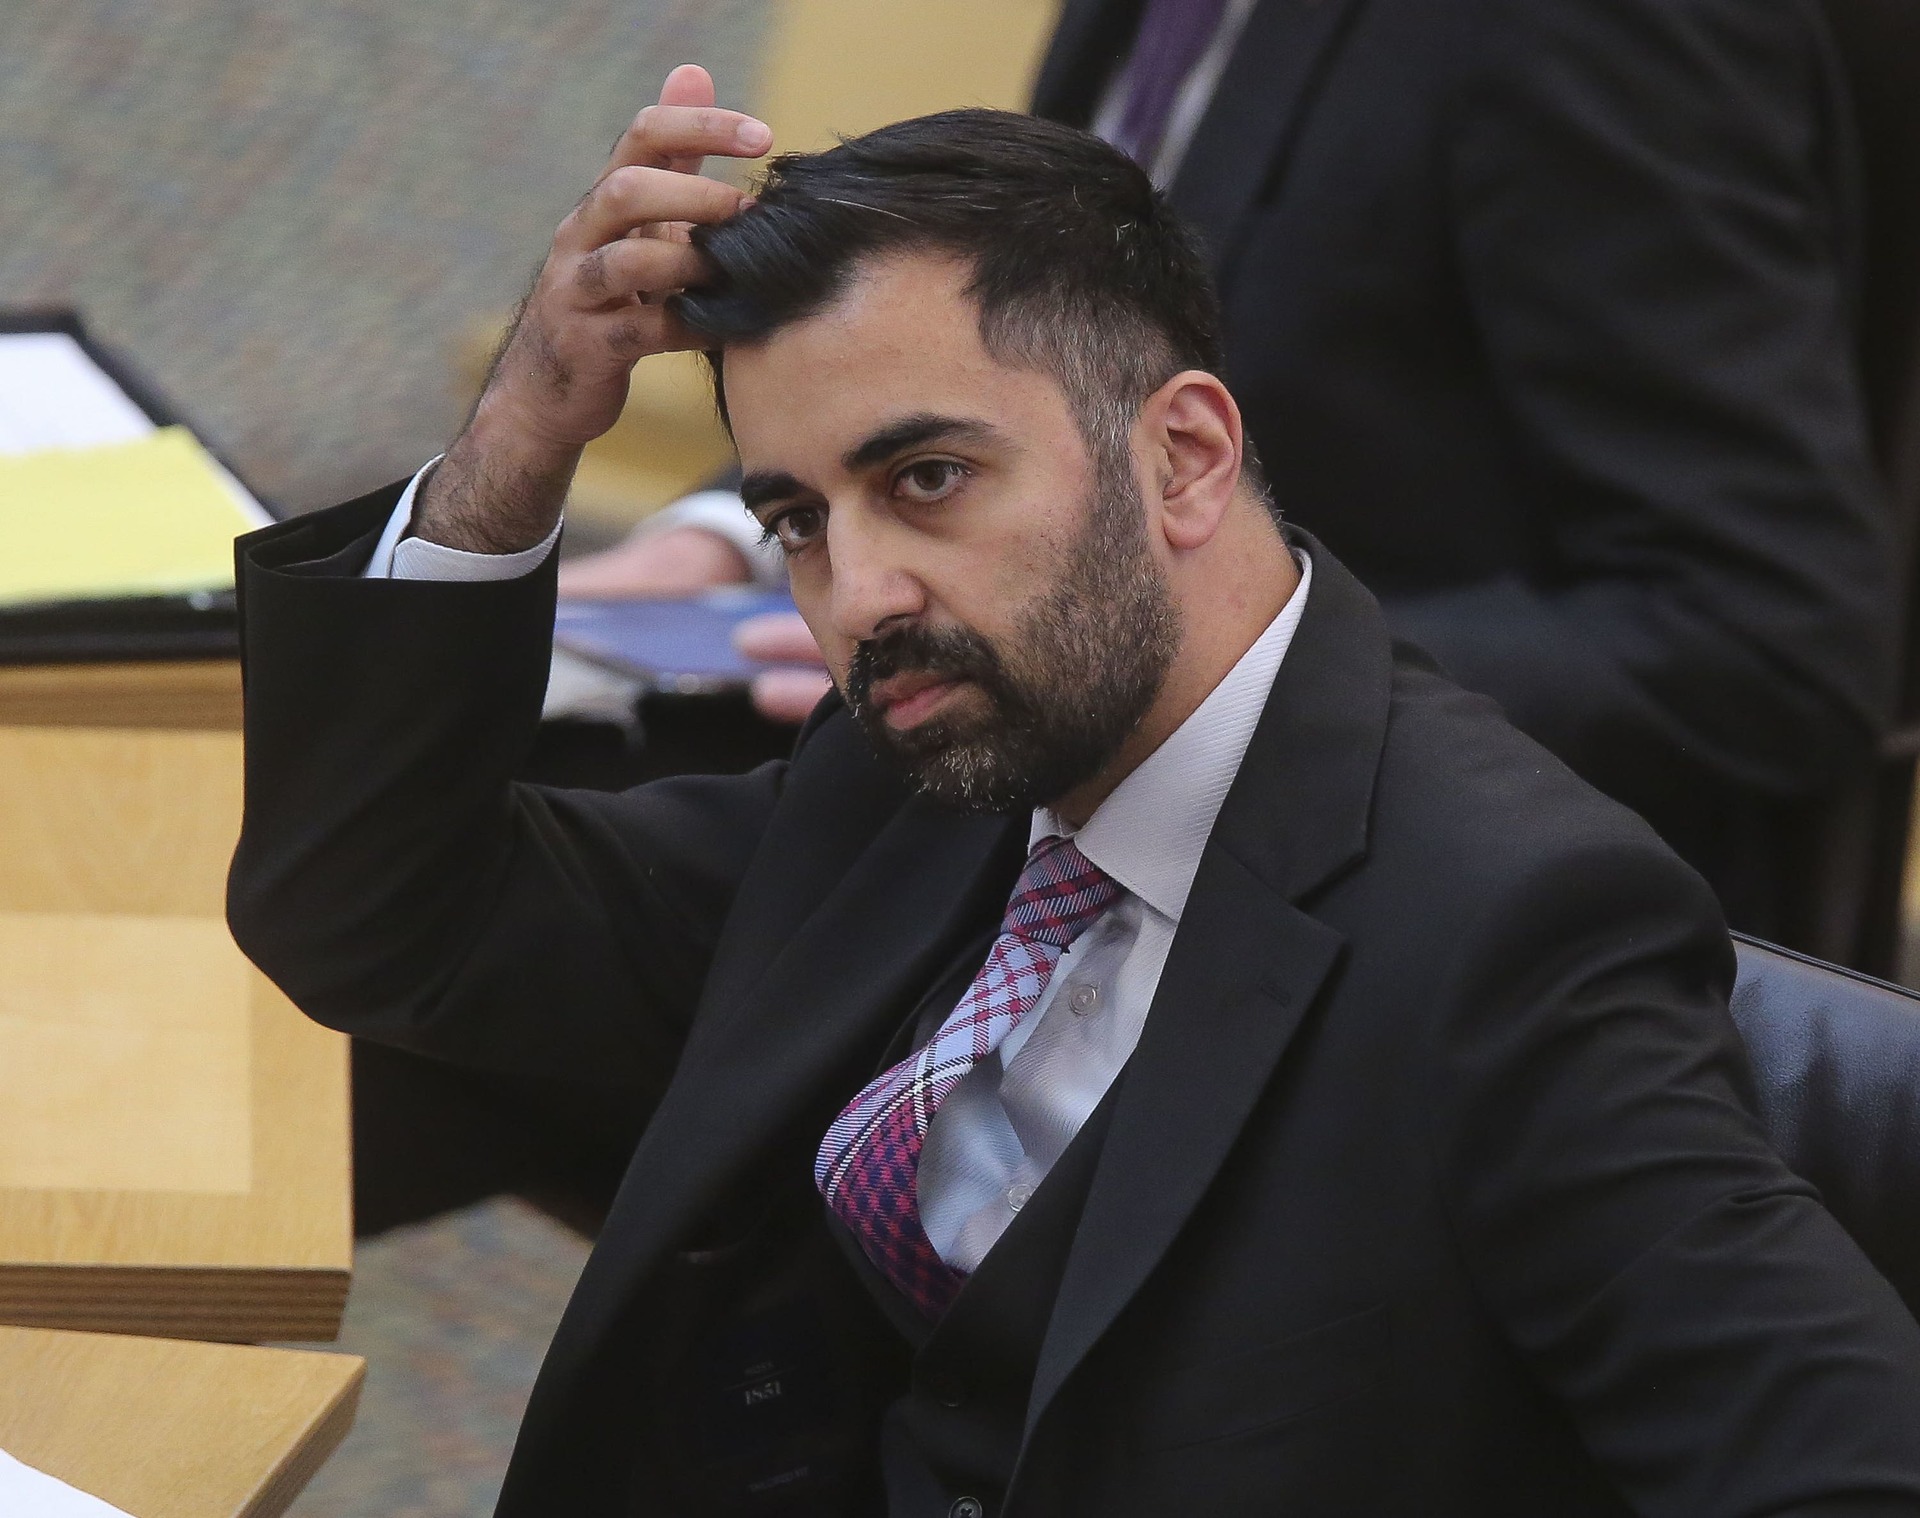 Humza Yousaf faced criticised over the Hate Crime Bill he introduced when justice secretary.